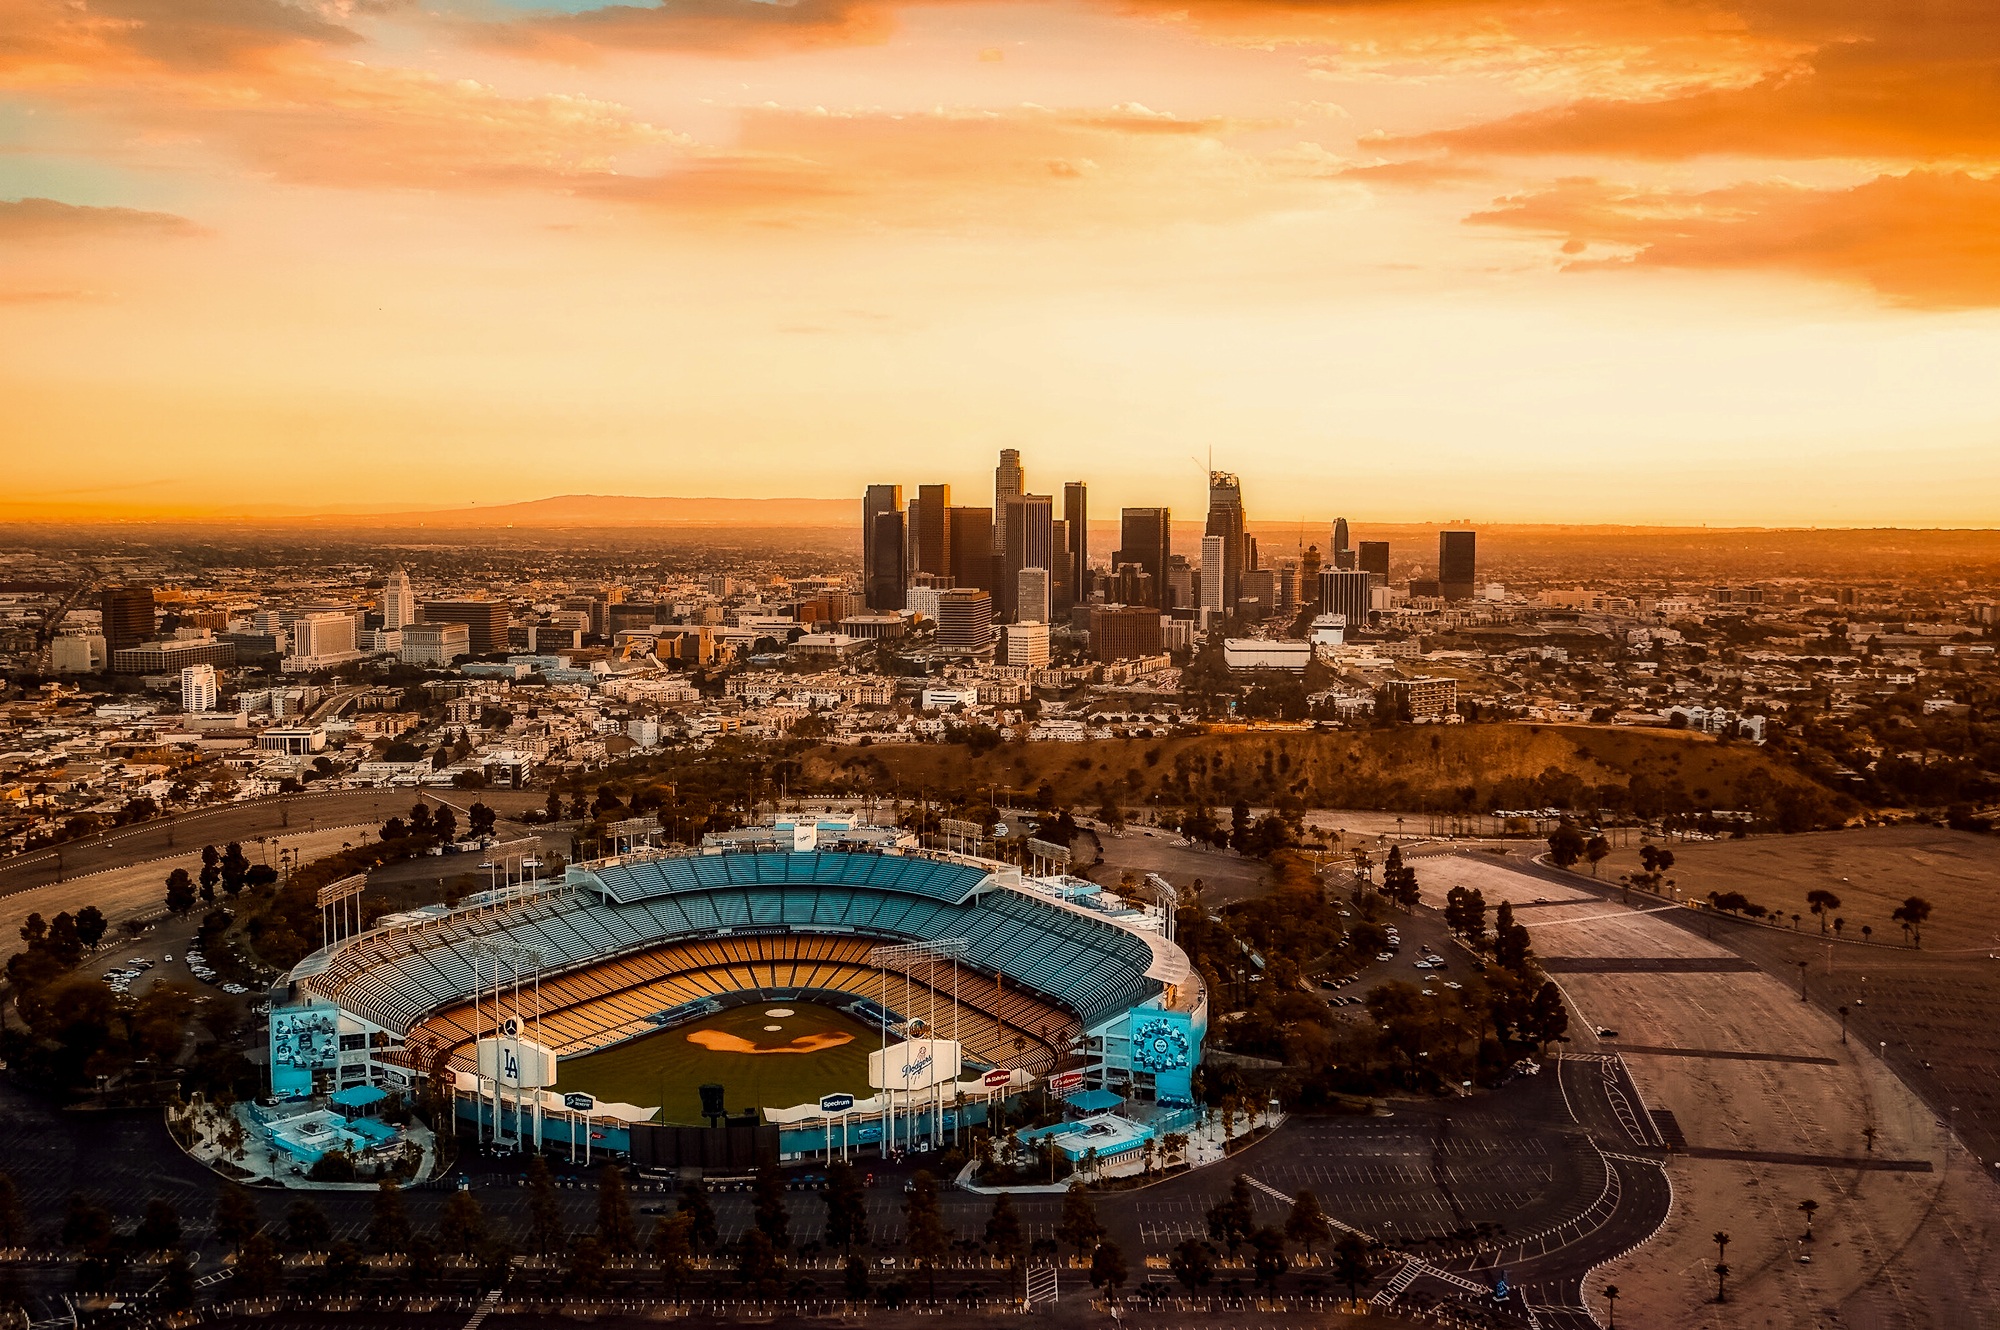 The sun setting over Dodger Stadium, an arena in Los Angeles